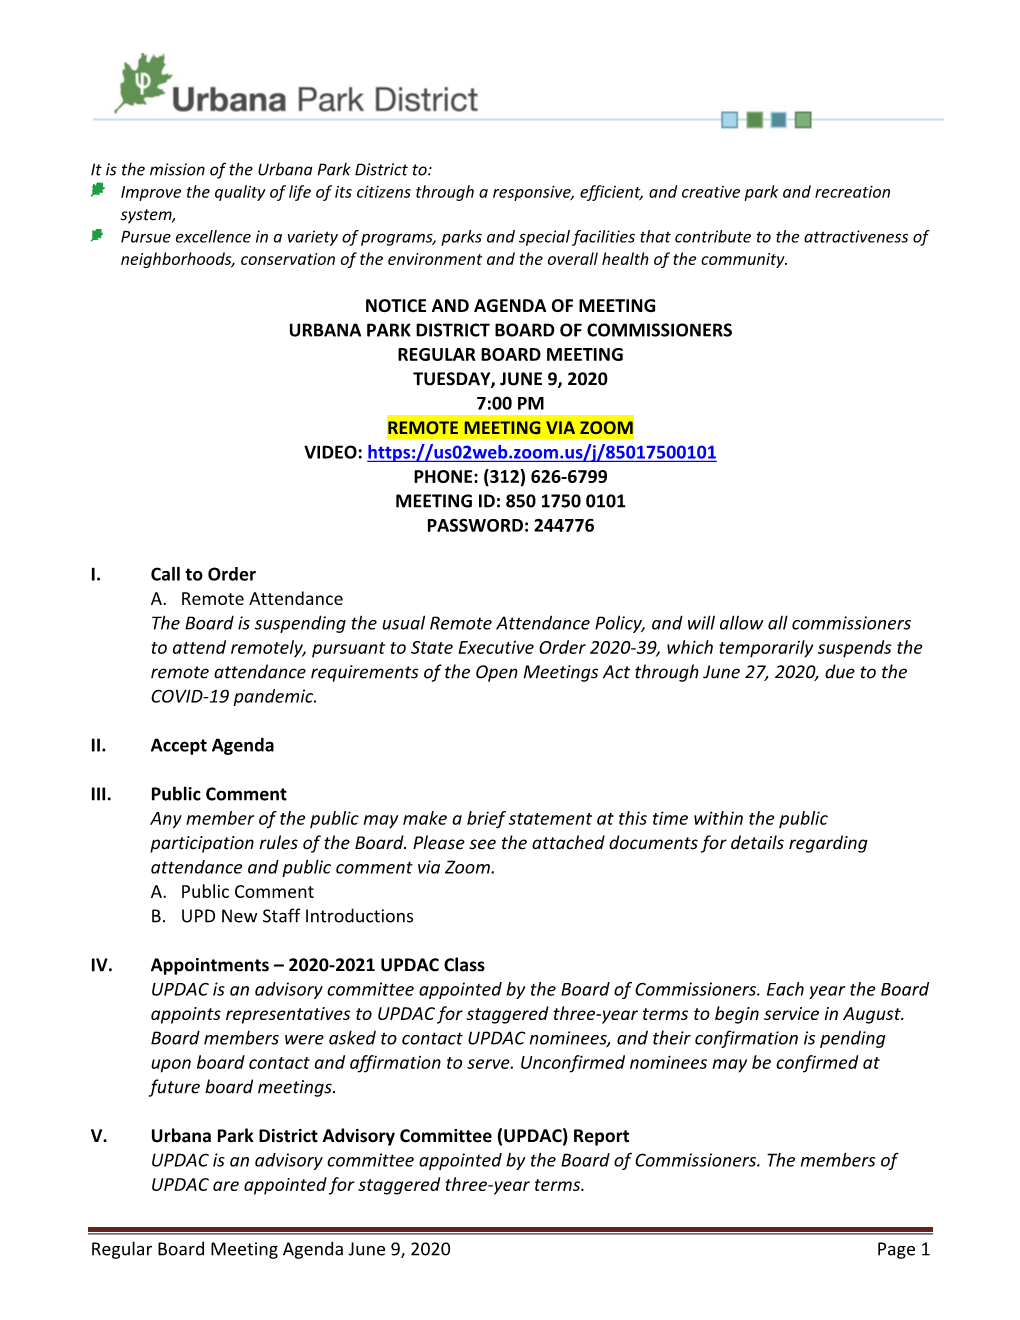 Regular Board Meeting Agenda June 9, 2020 Page 1 NOTICE AND